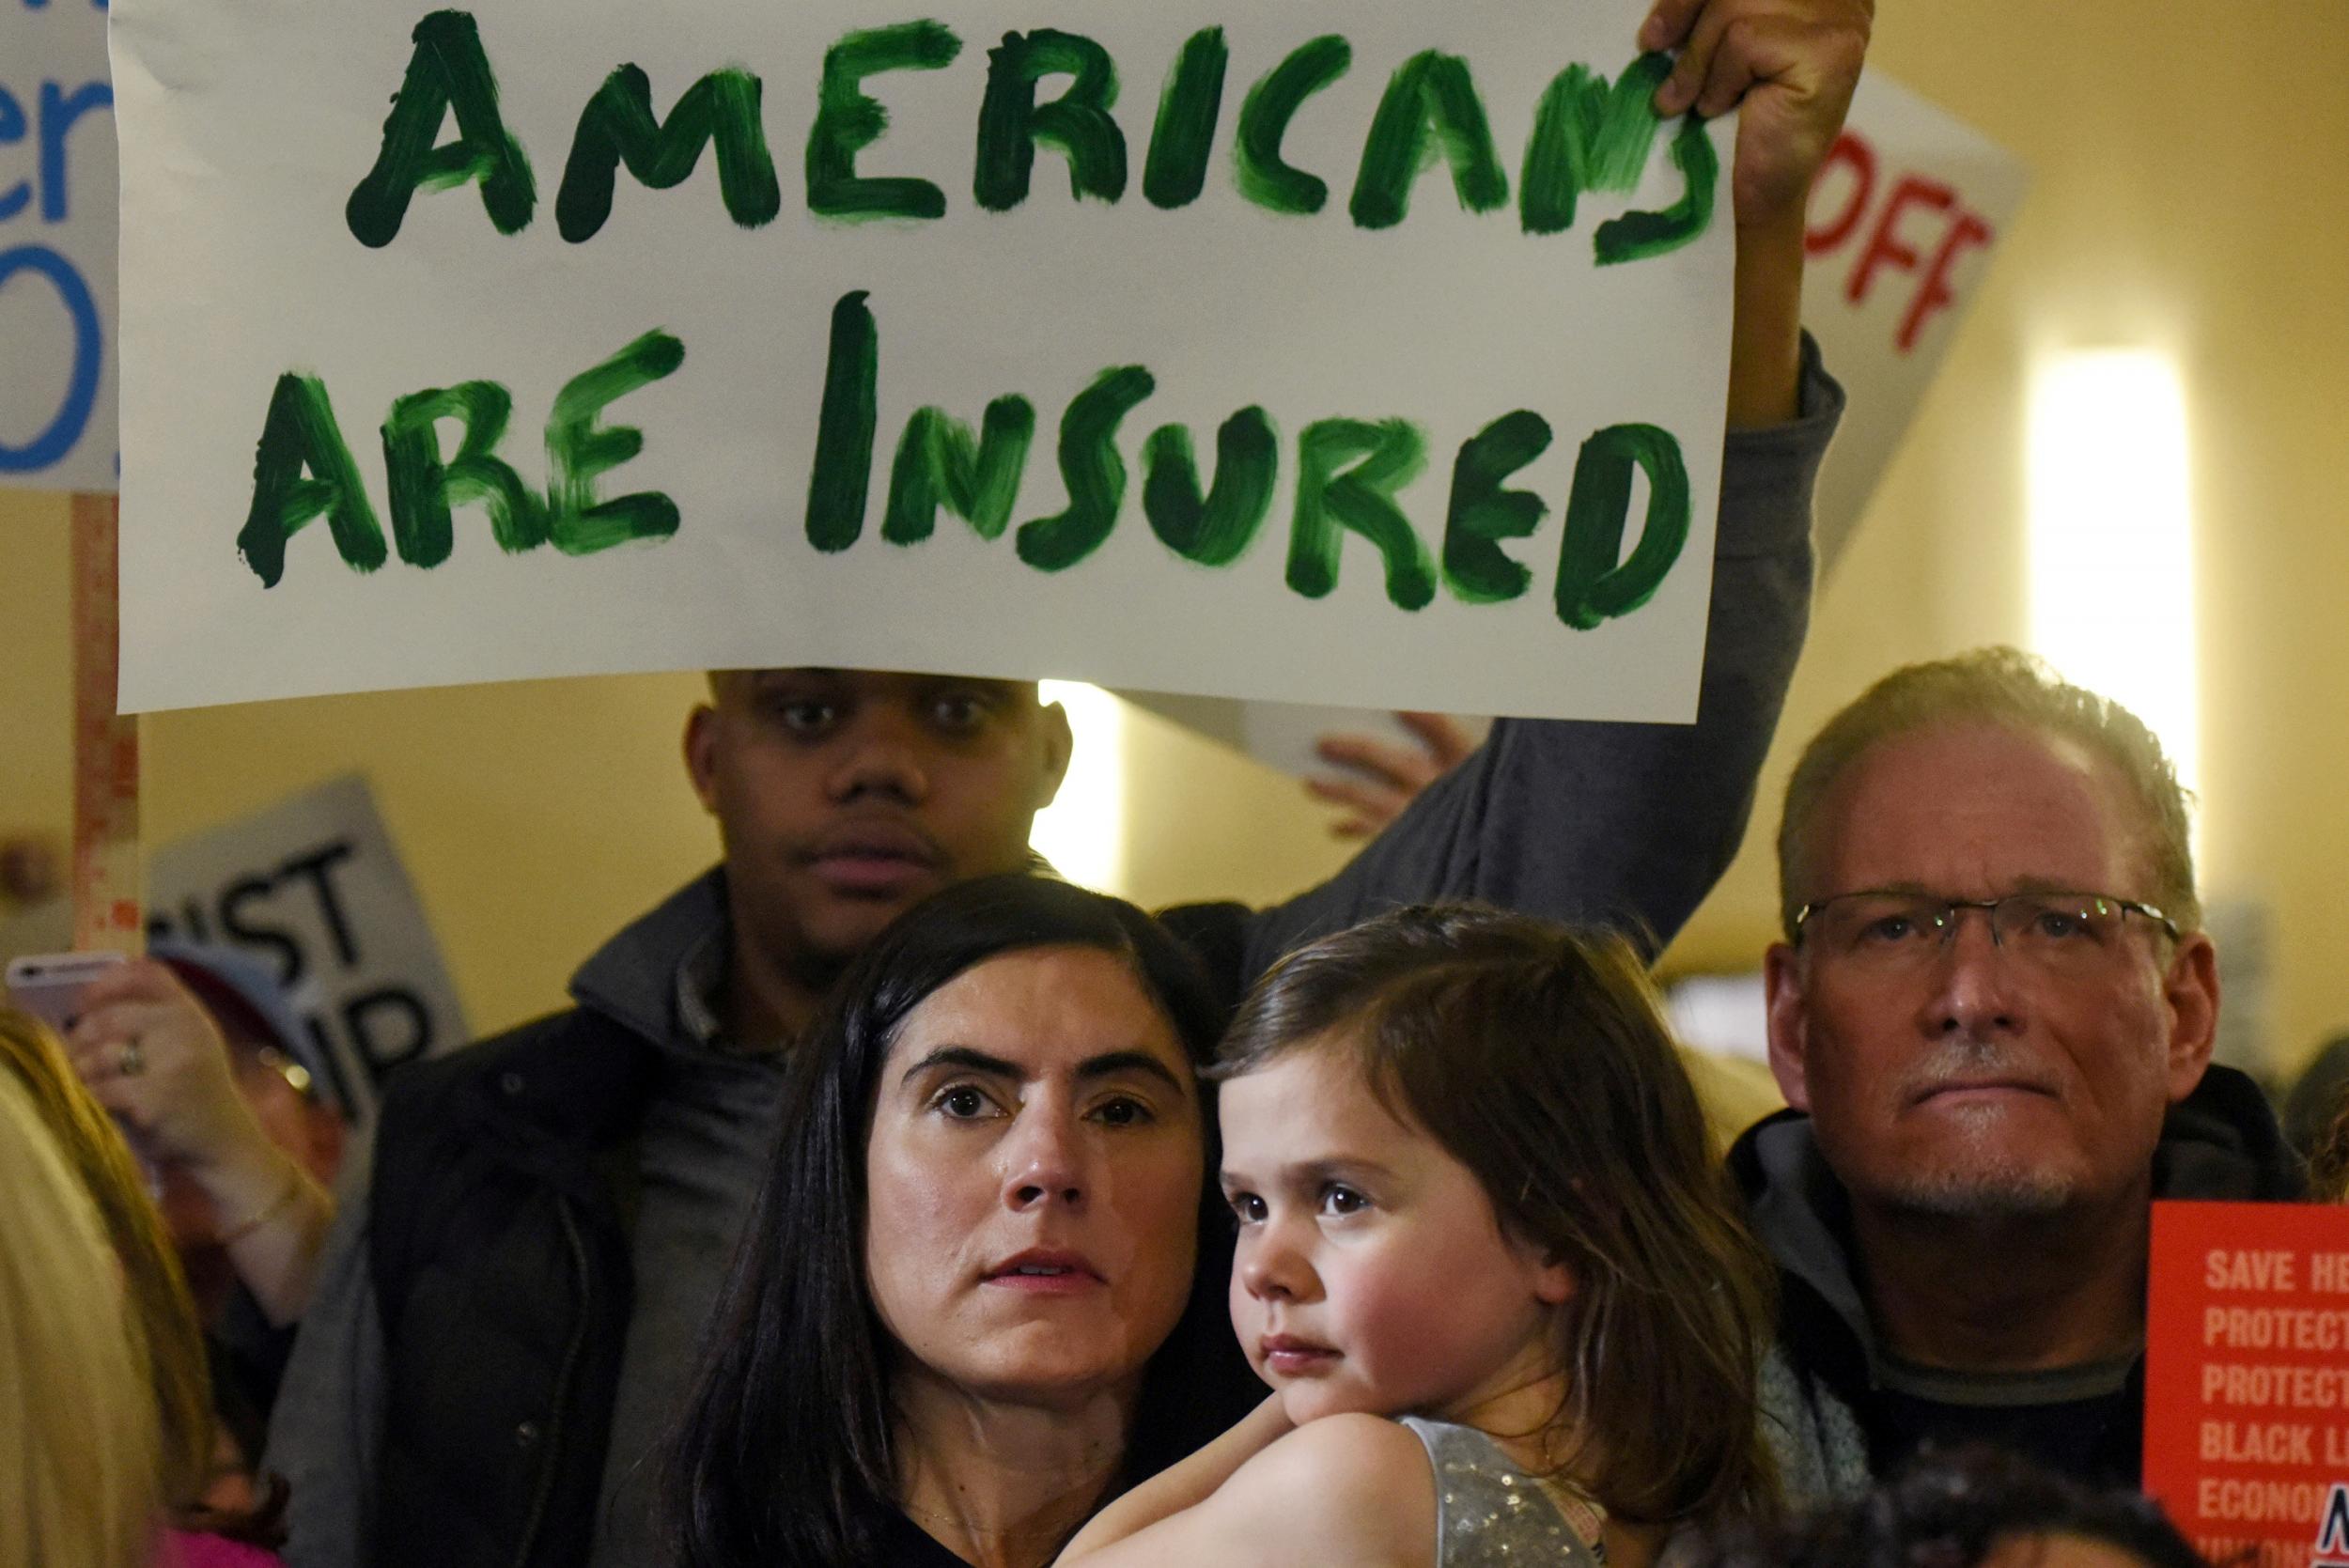 Obamacare supporters demonstrate against Donald Trump at a rally in New Jersey (Stephanie Keith/Reuters)